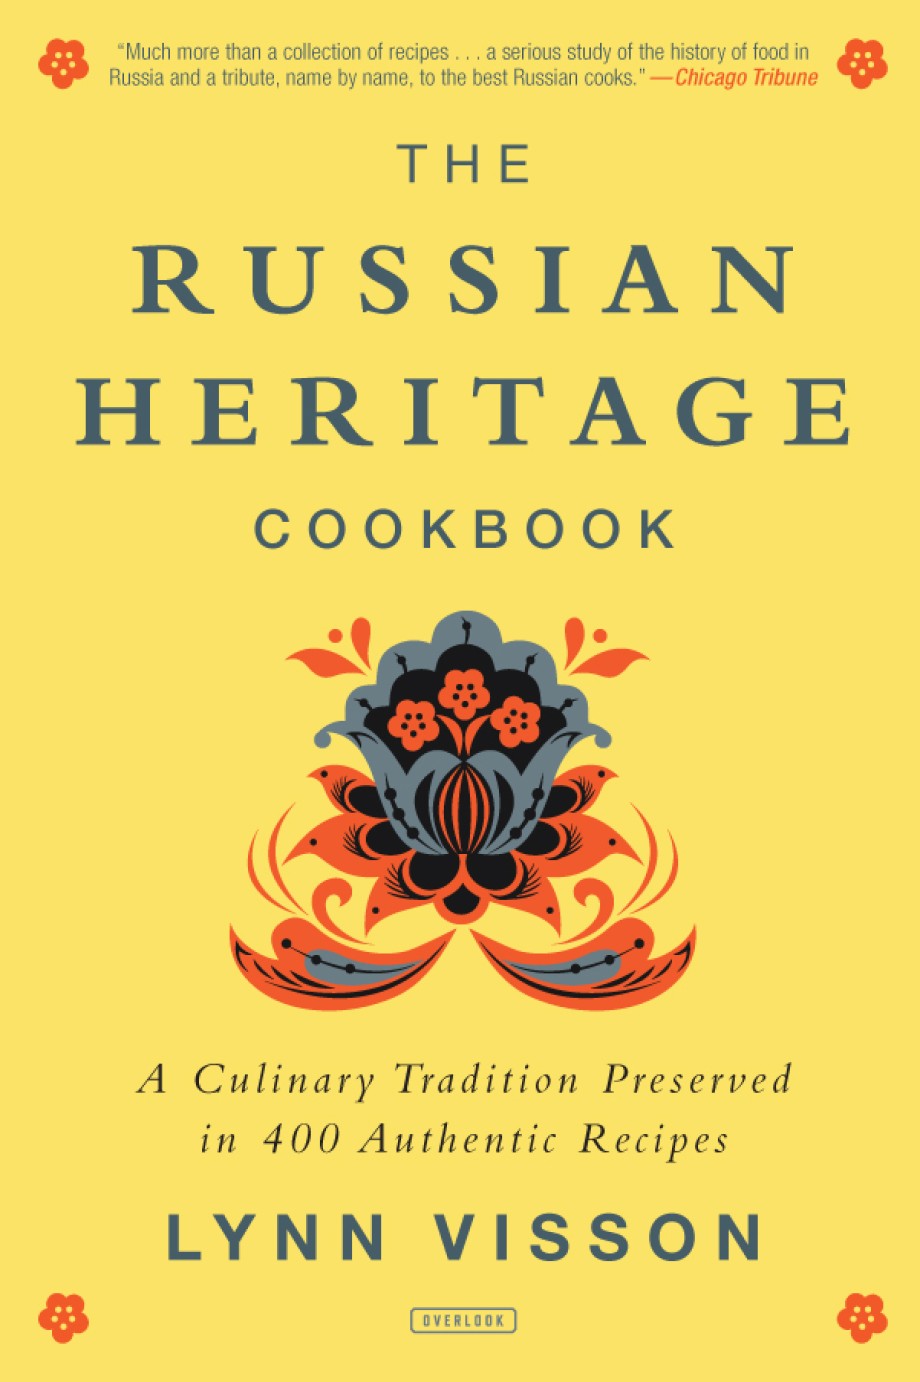 Russian Heritage Cookbook A Culinary Tradition in Over 400 Recipes